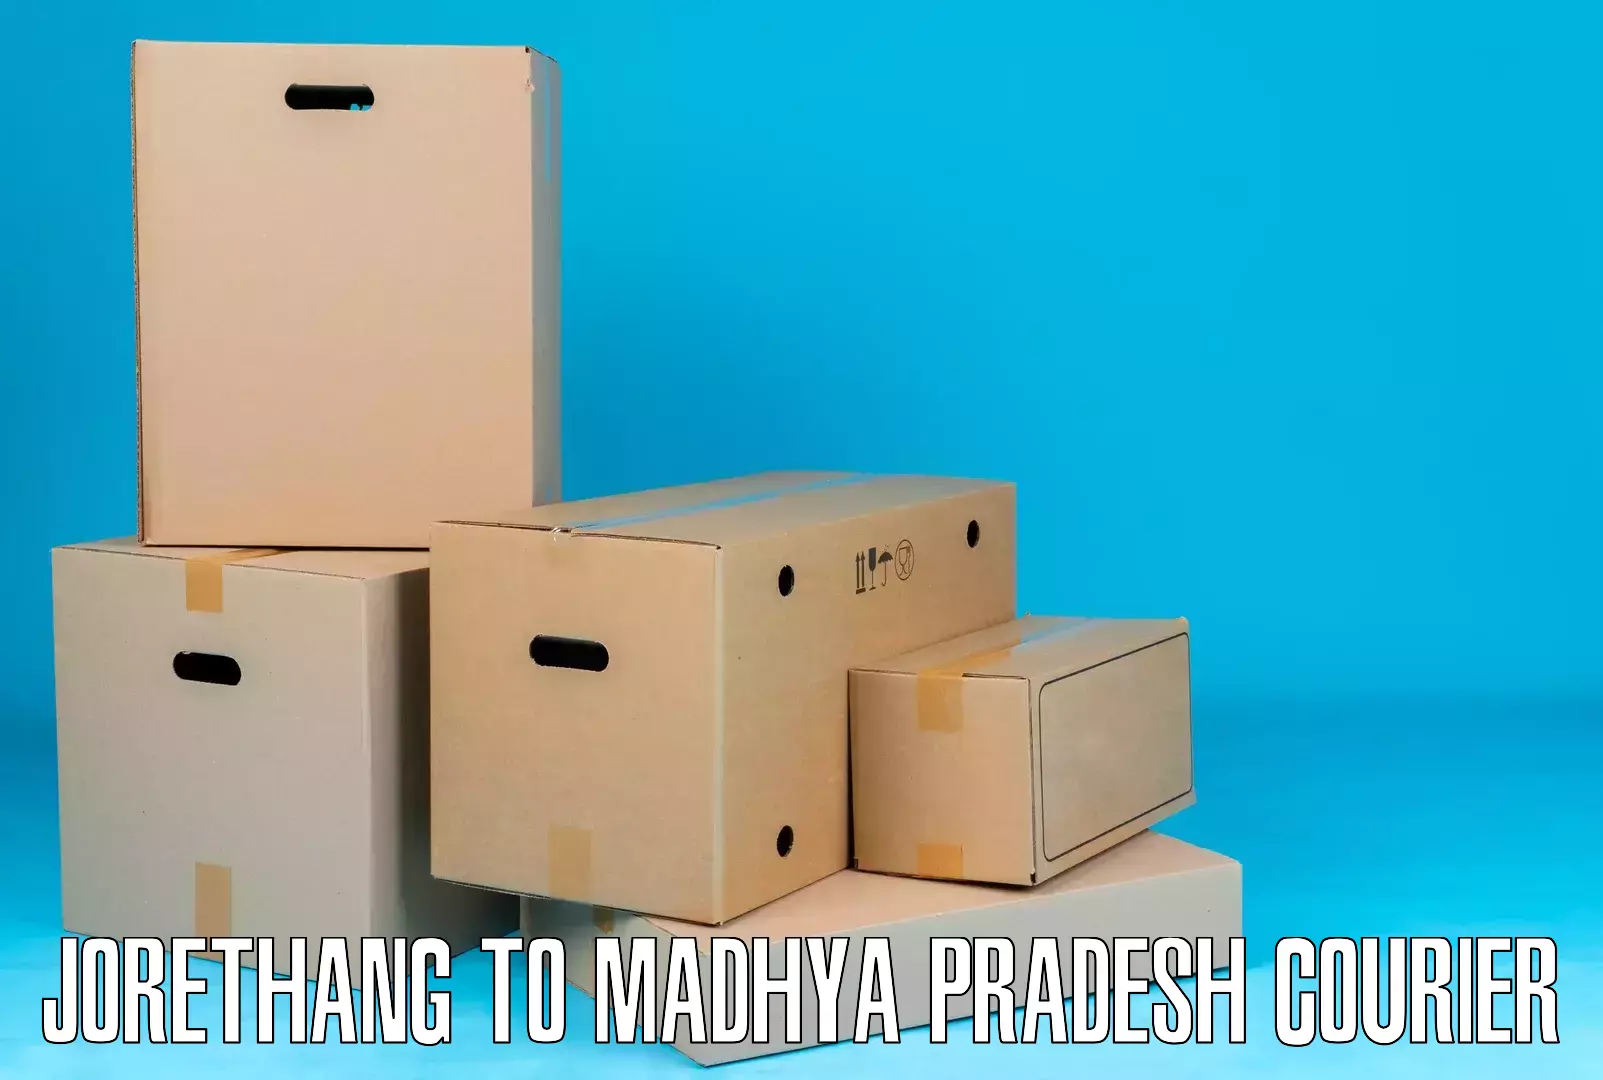 Quality courier services Jorethang to Mandideep